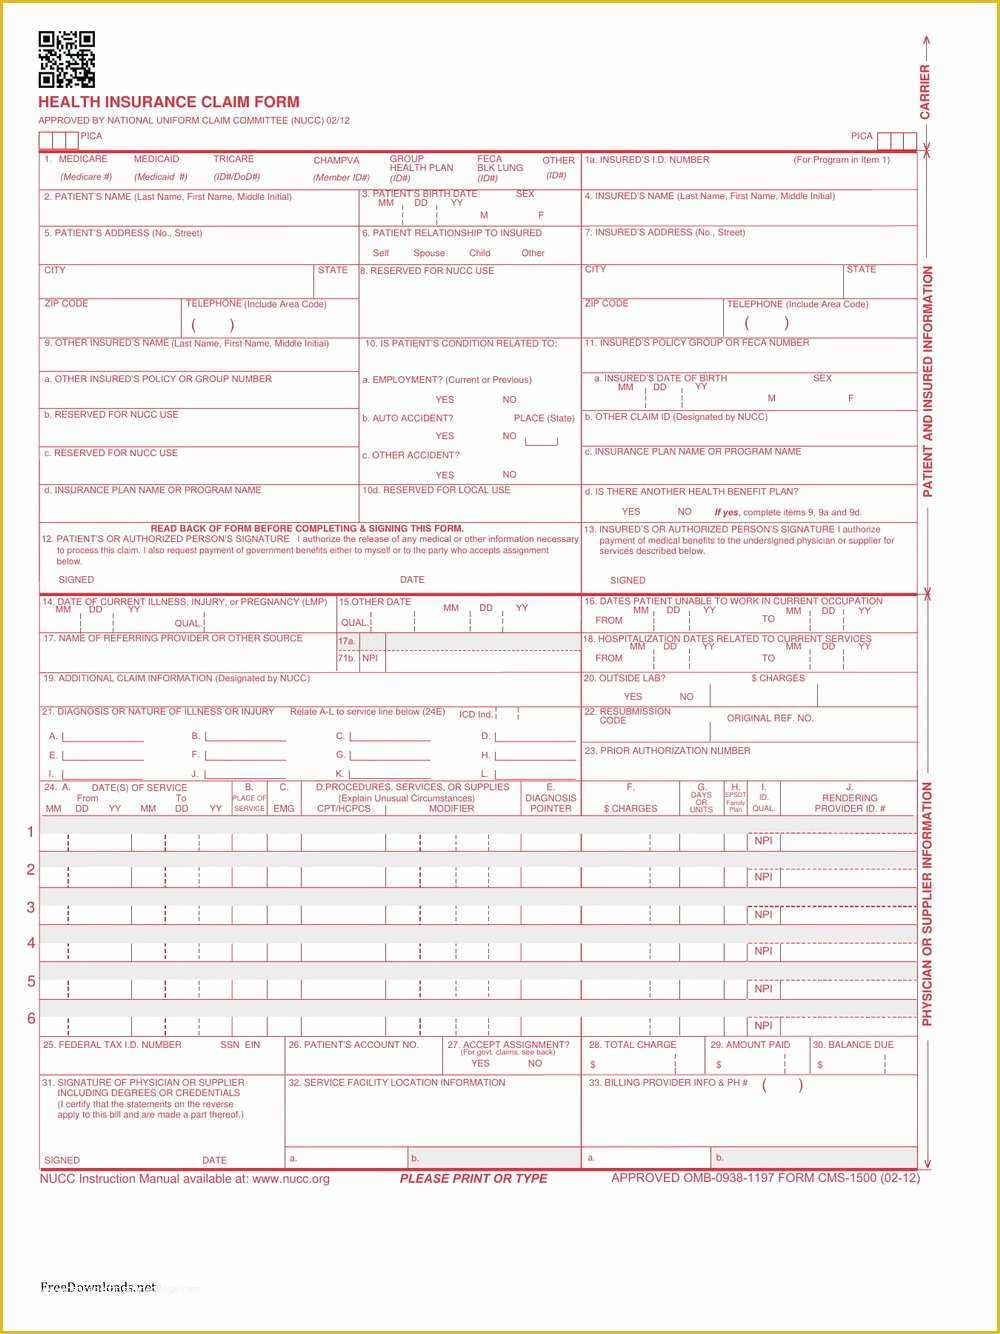 Free Fillable Cms 1500 Template Of Cms 1500 form Fillable software forms 9350